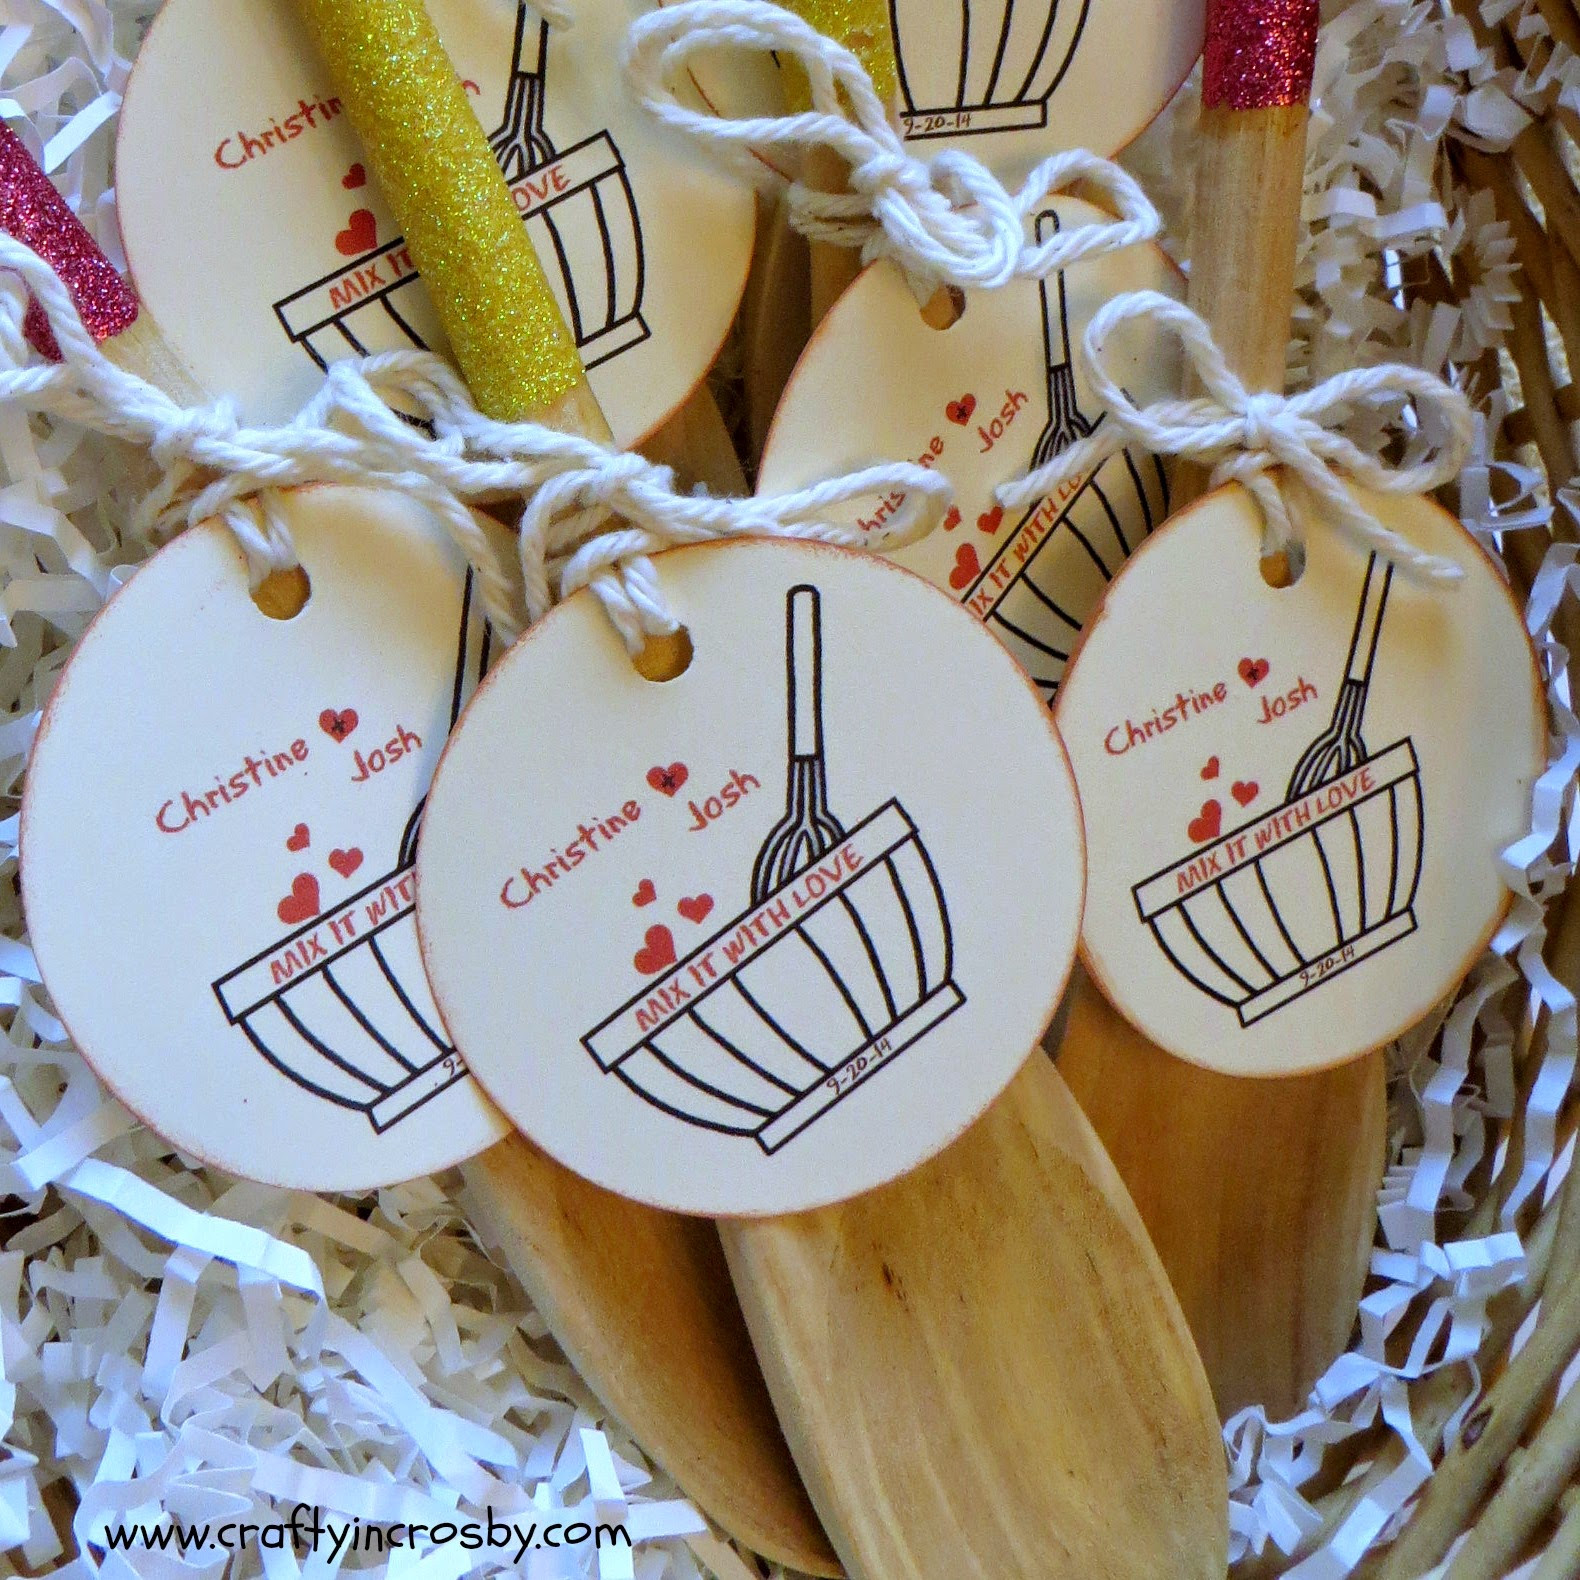 DIY Wedding Shower Gifts
 Crafty in Crosby Bridal Shower Favors Mix it With Love